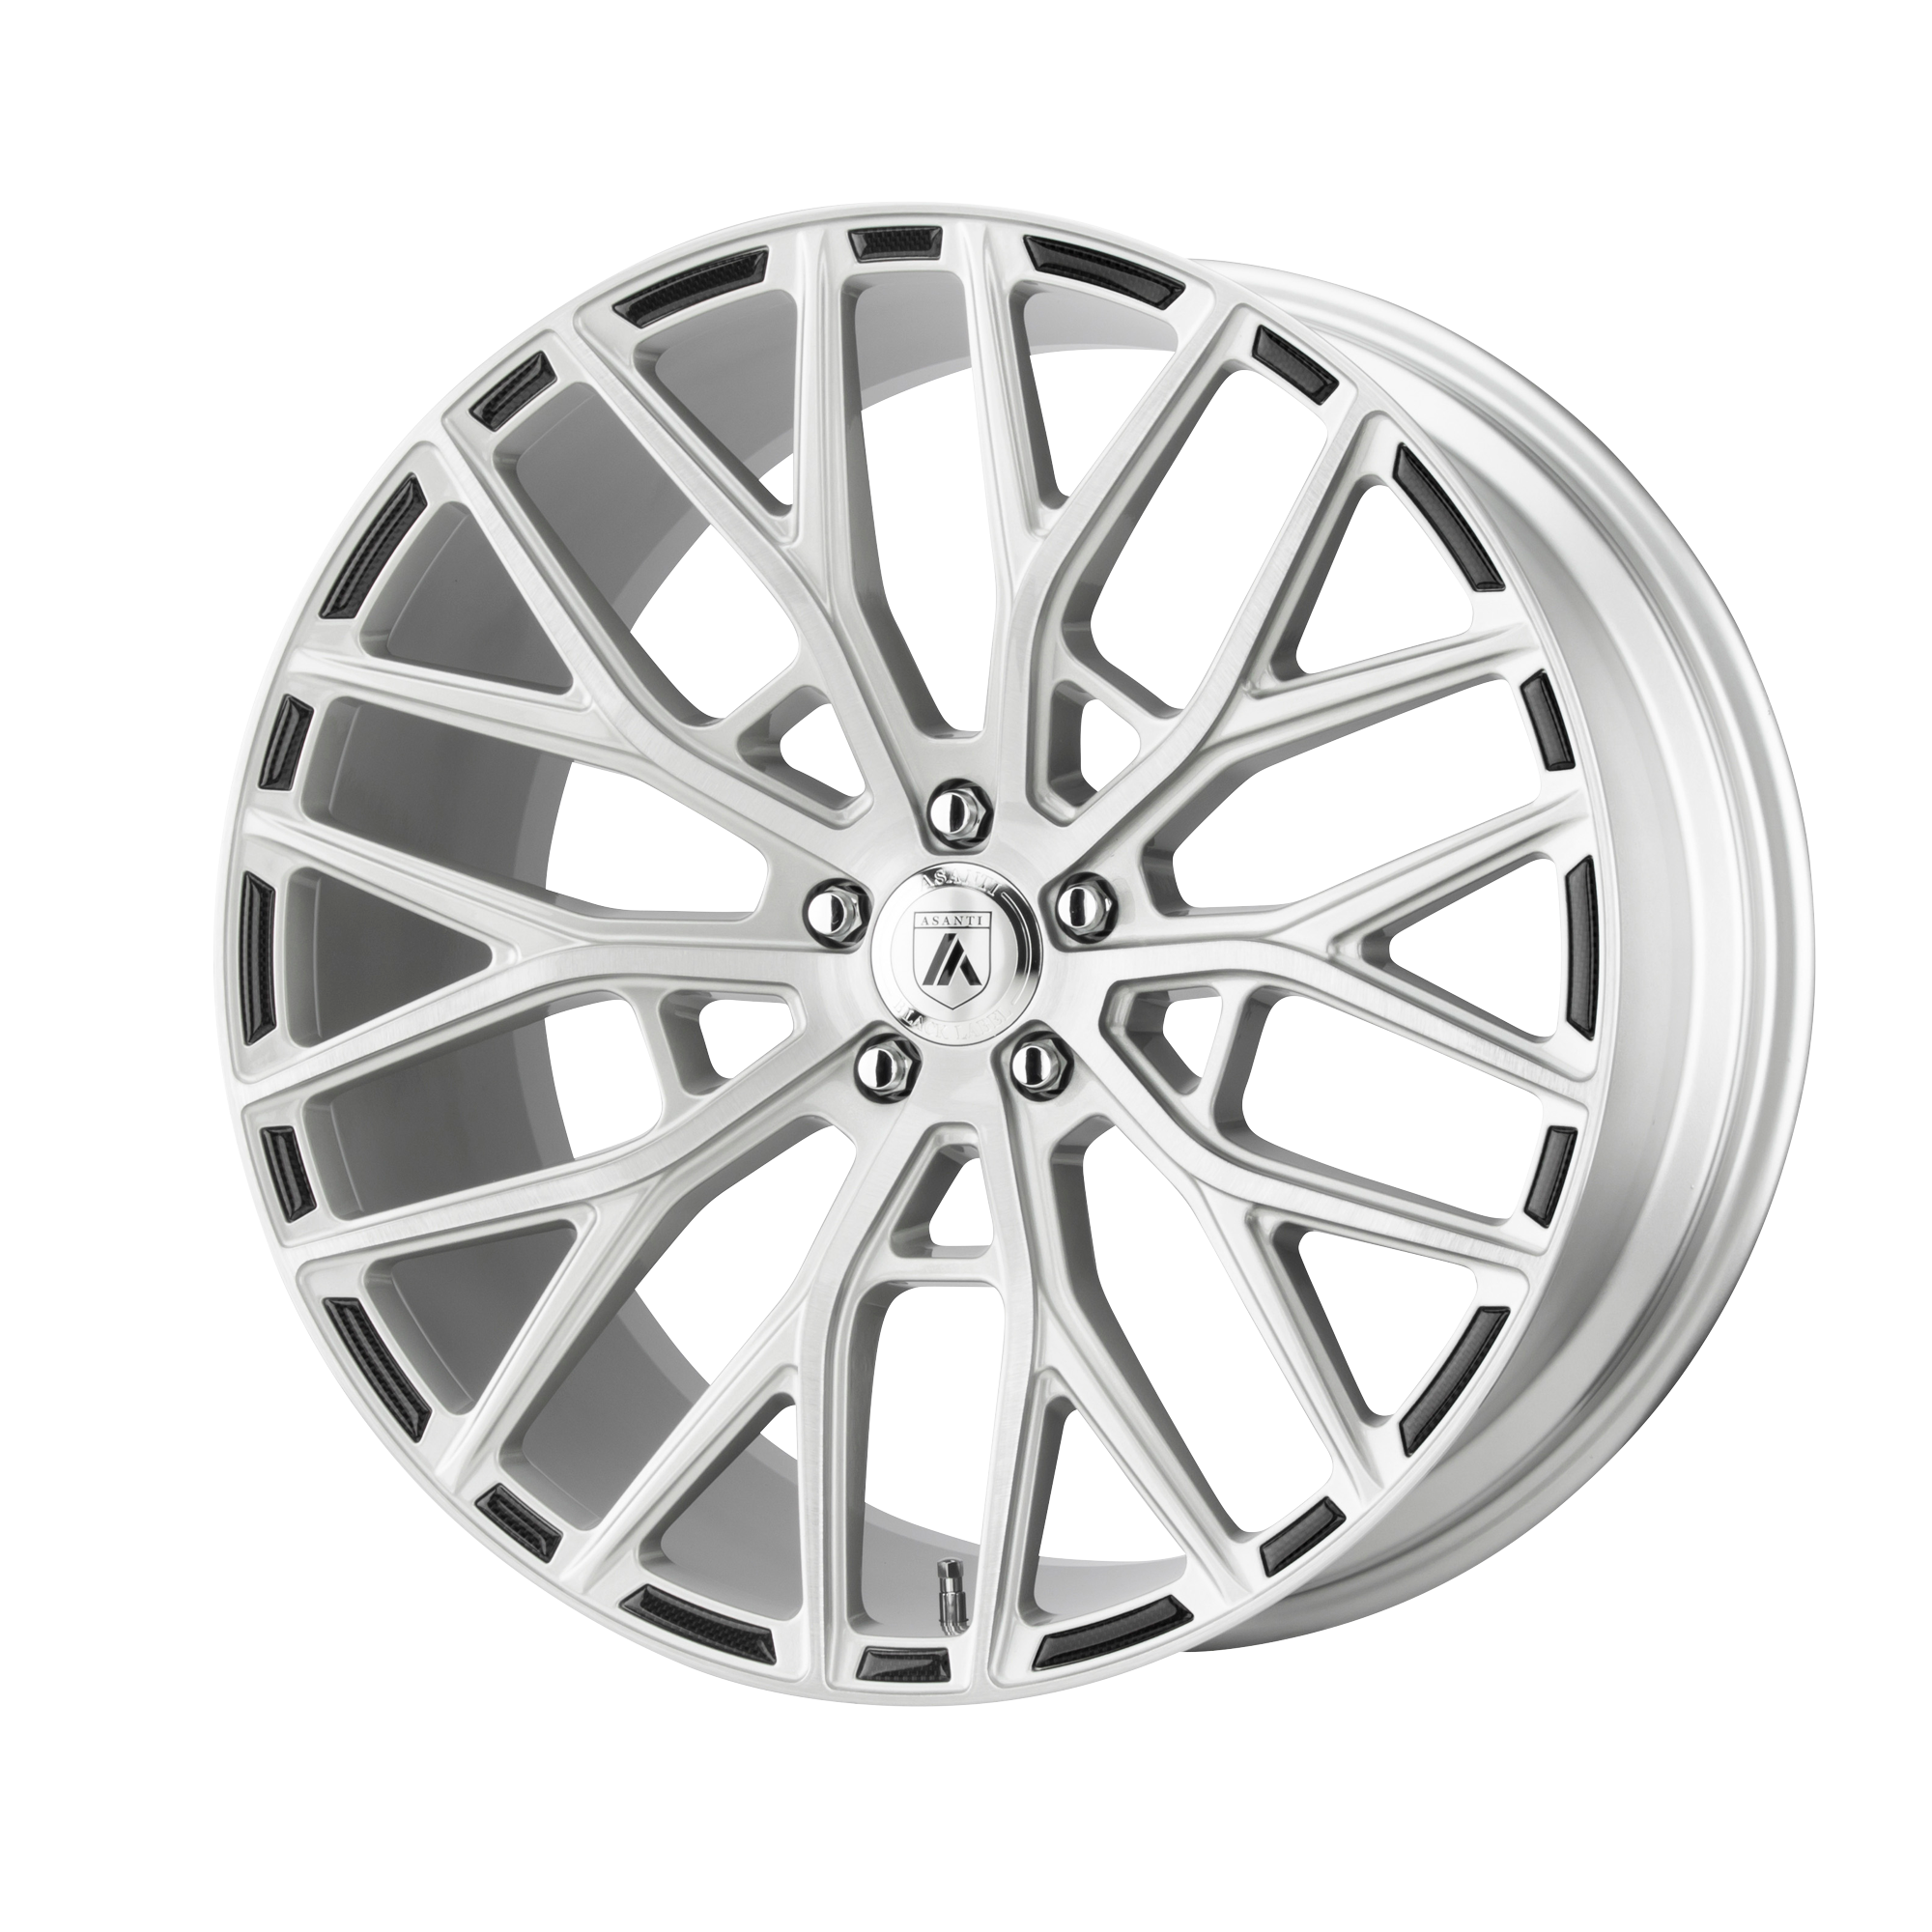 LEO 20x9 5x114.30 BRUSHED SILVER (35 mm) - Tires and Engine Performance